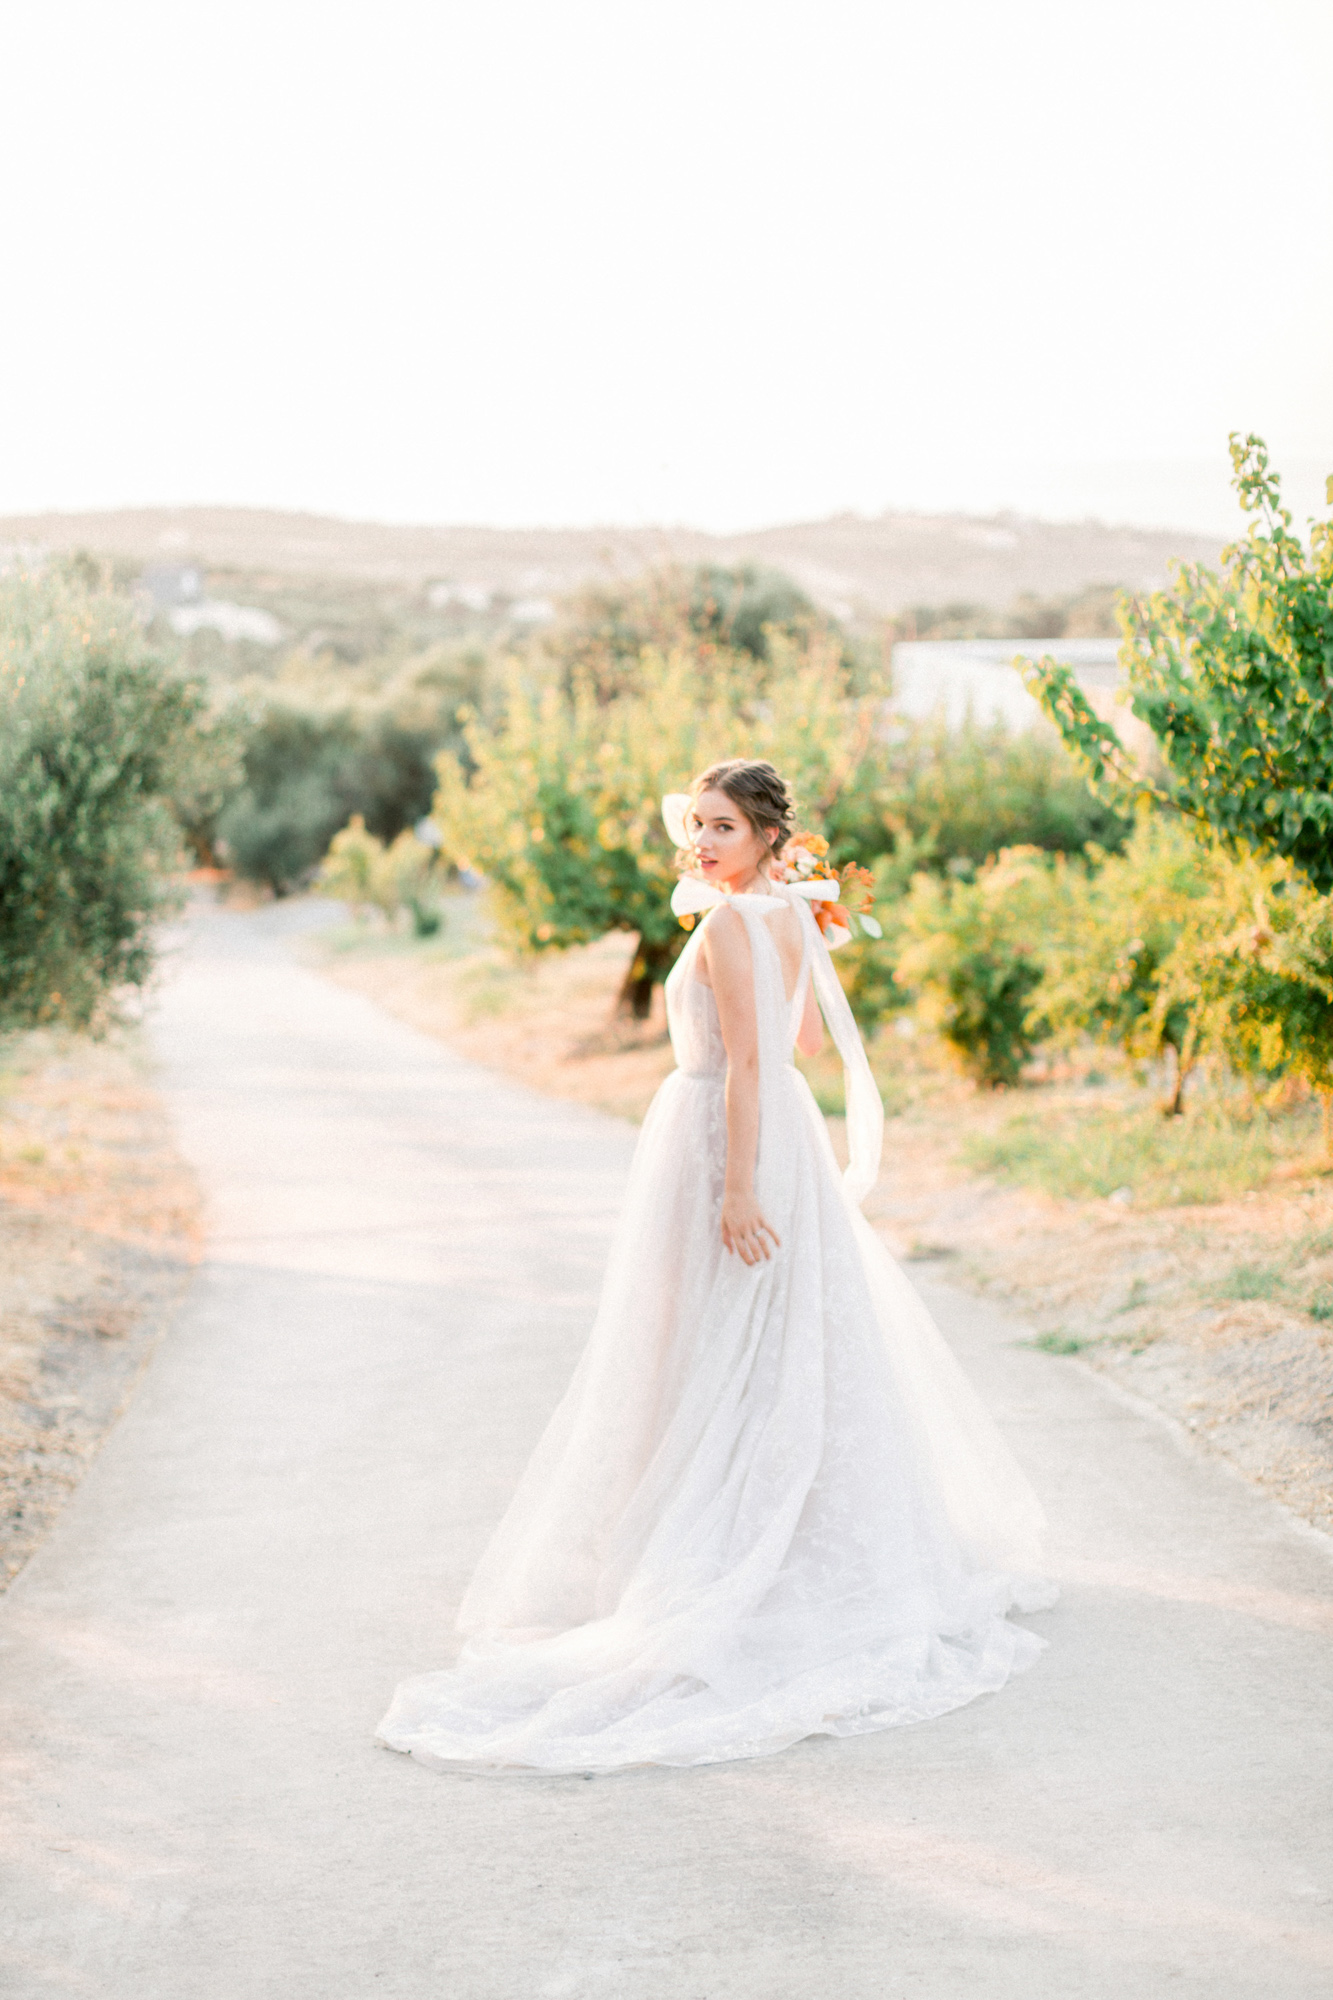 Stunning modern bride holding flowers at a sunset wedding editorial in Grecotel Agreco Farms Crete Greece as published on Ruffled blog.